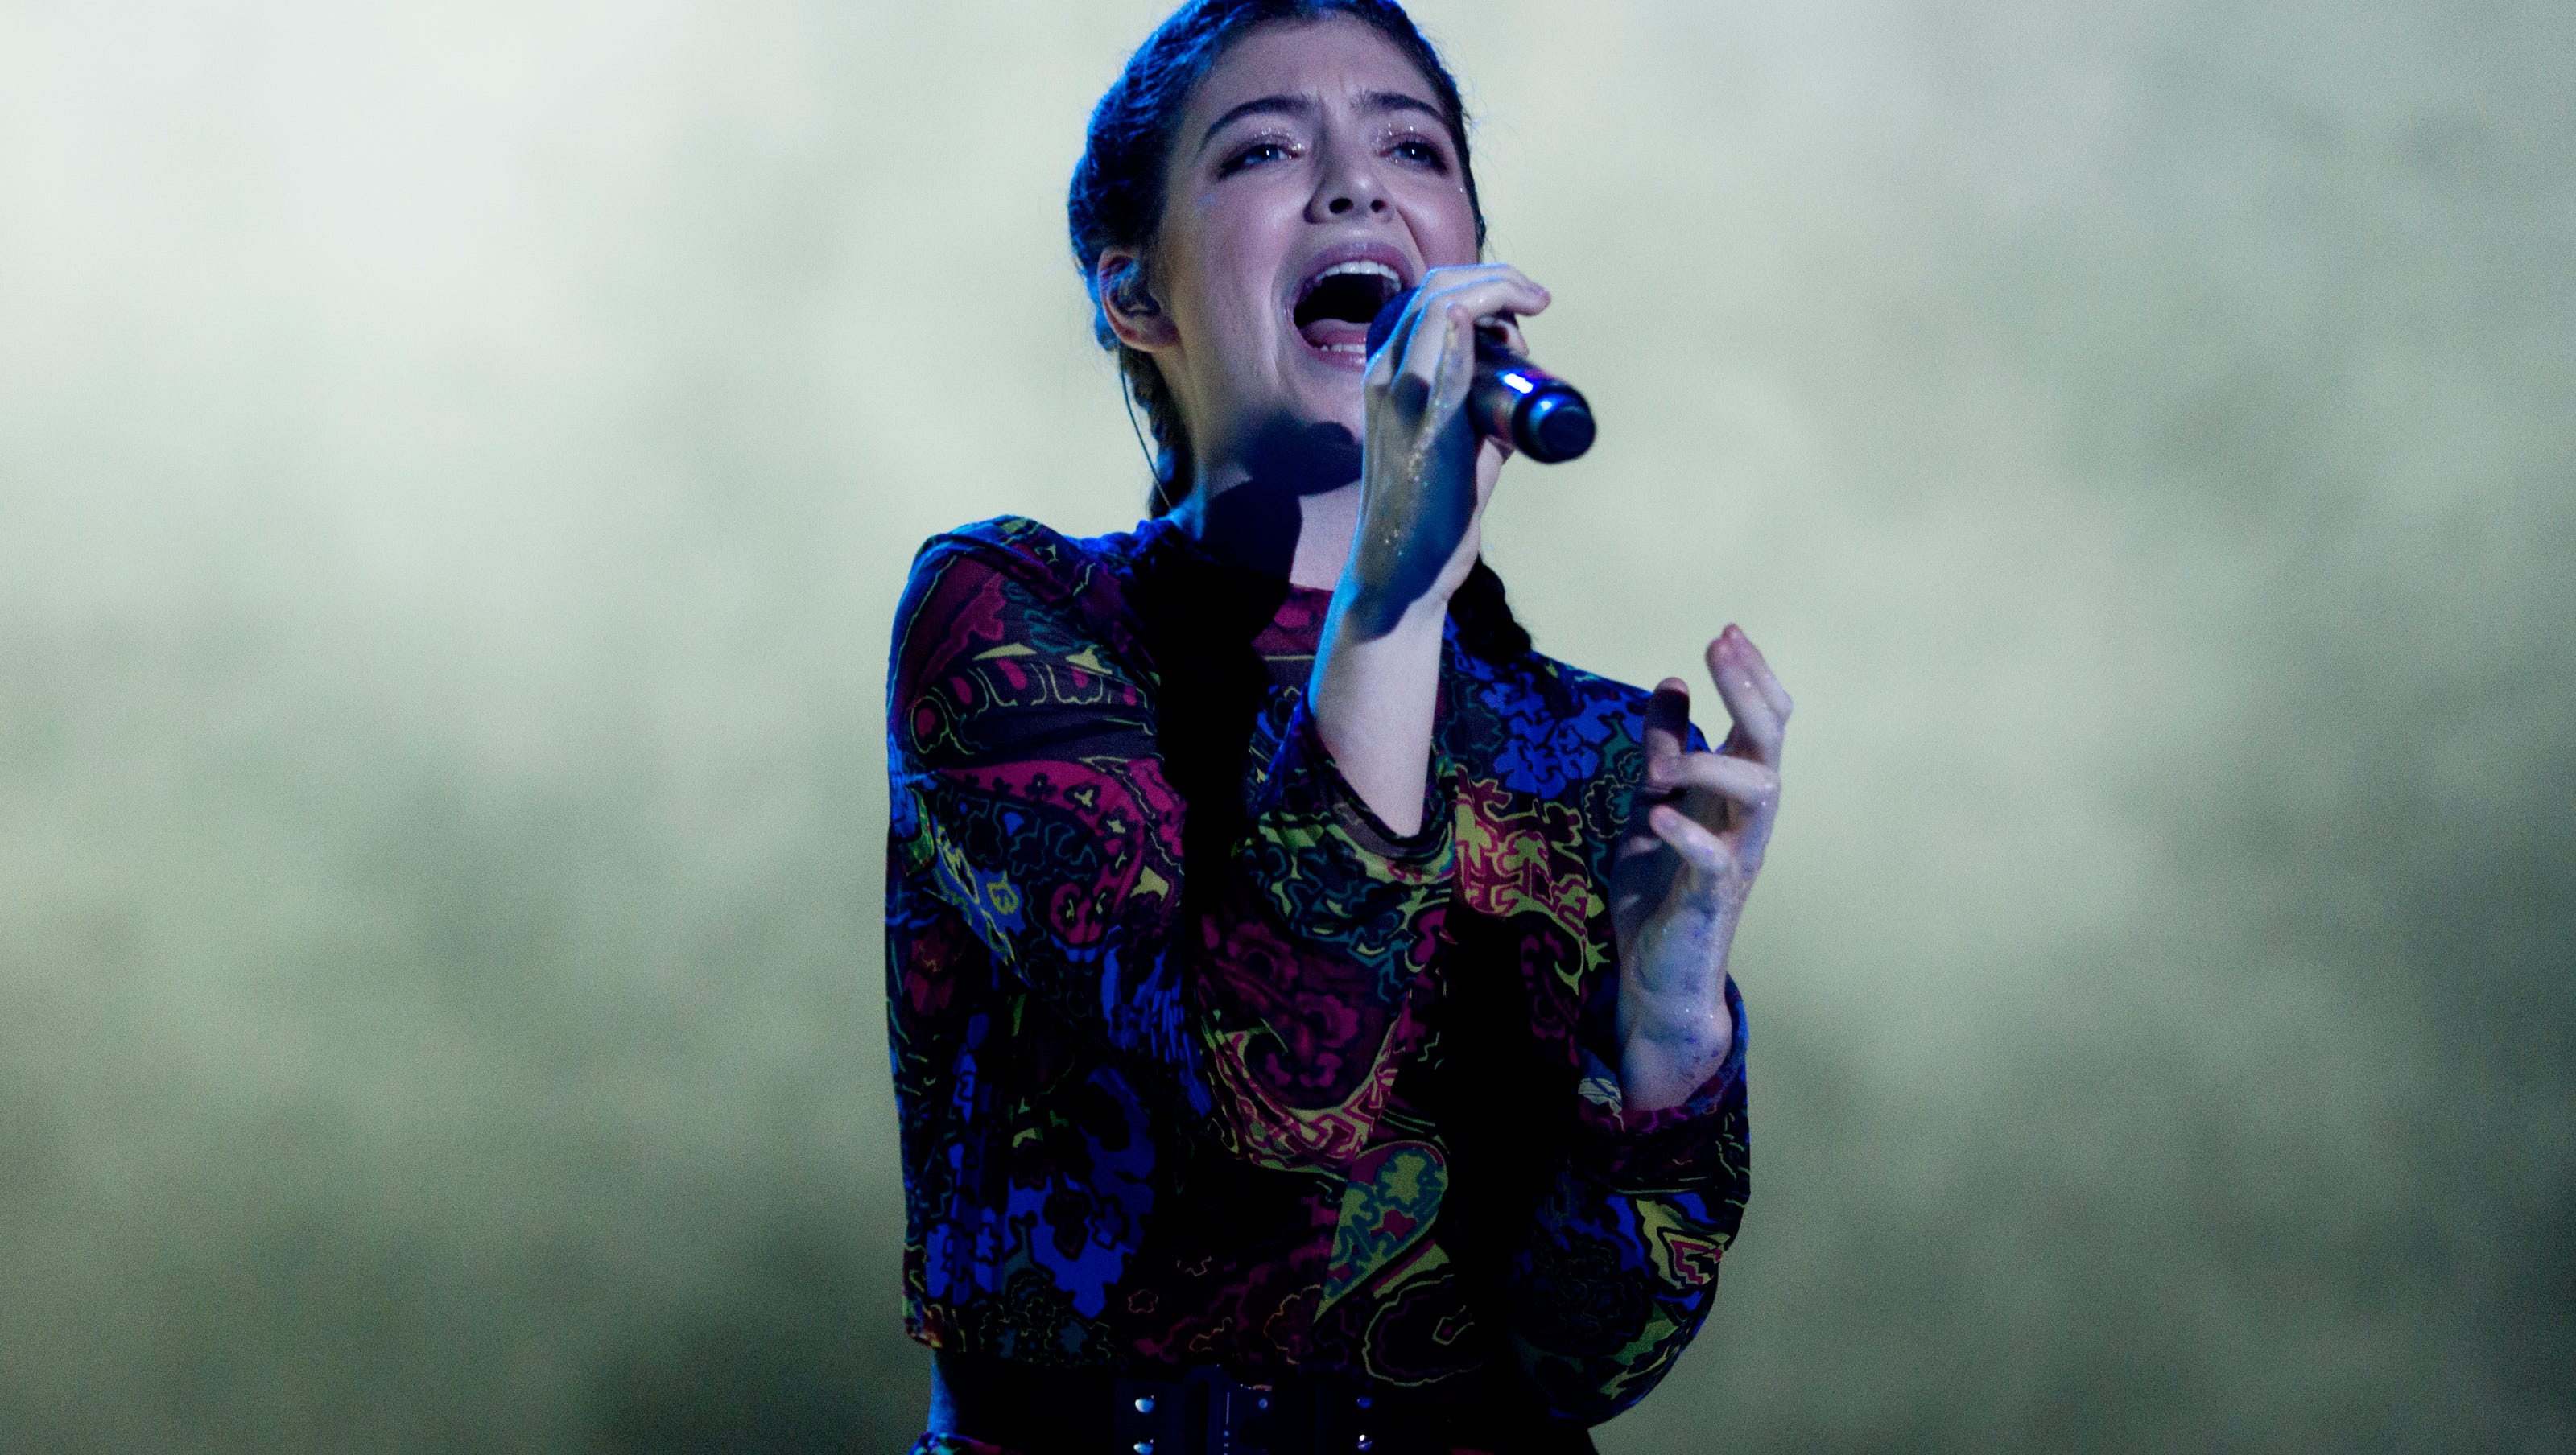 Lorde to kick off U.S. tour at Nashville's Grand Ole Opry House